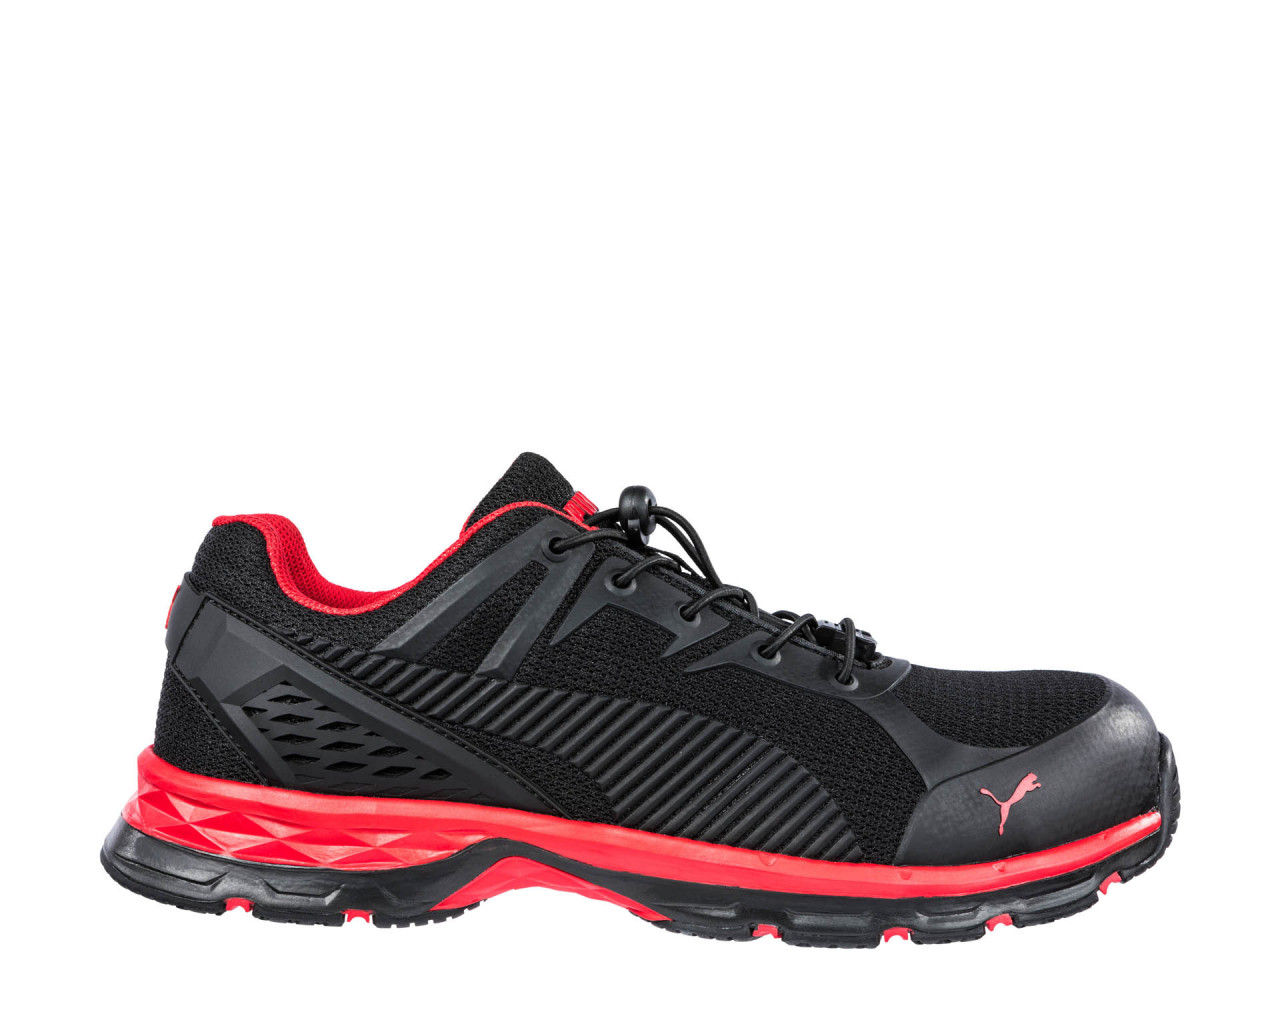 PUMA SAFETY FUSE MOTION 2.0 RED LOW S1P ESD HRO SRC